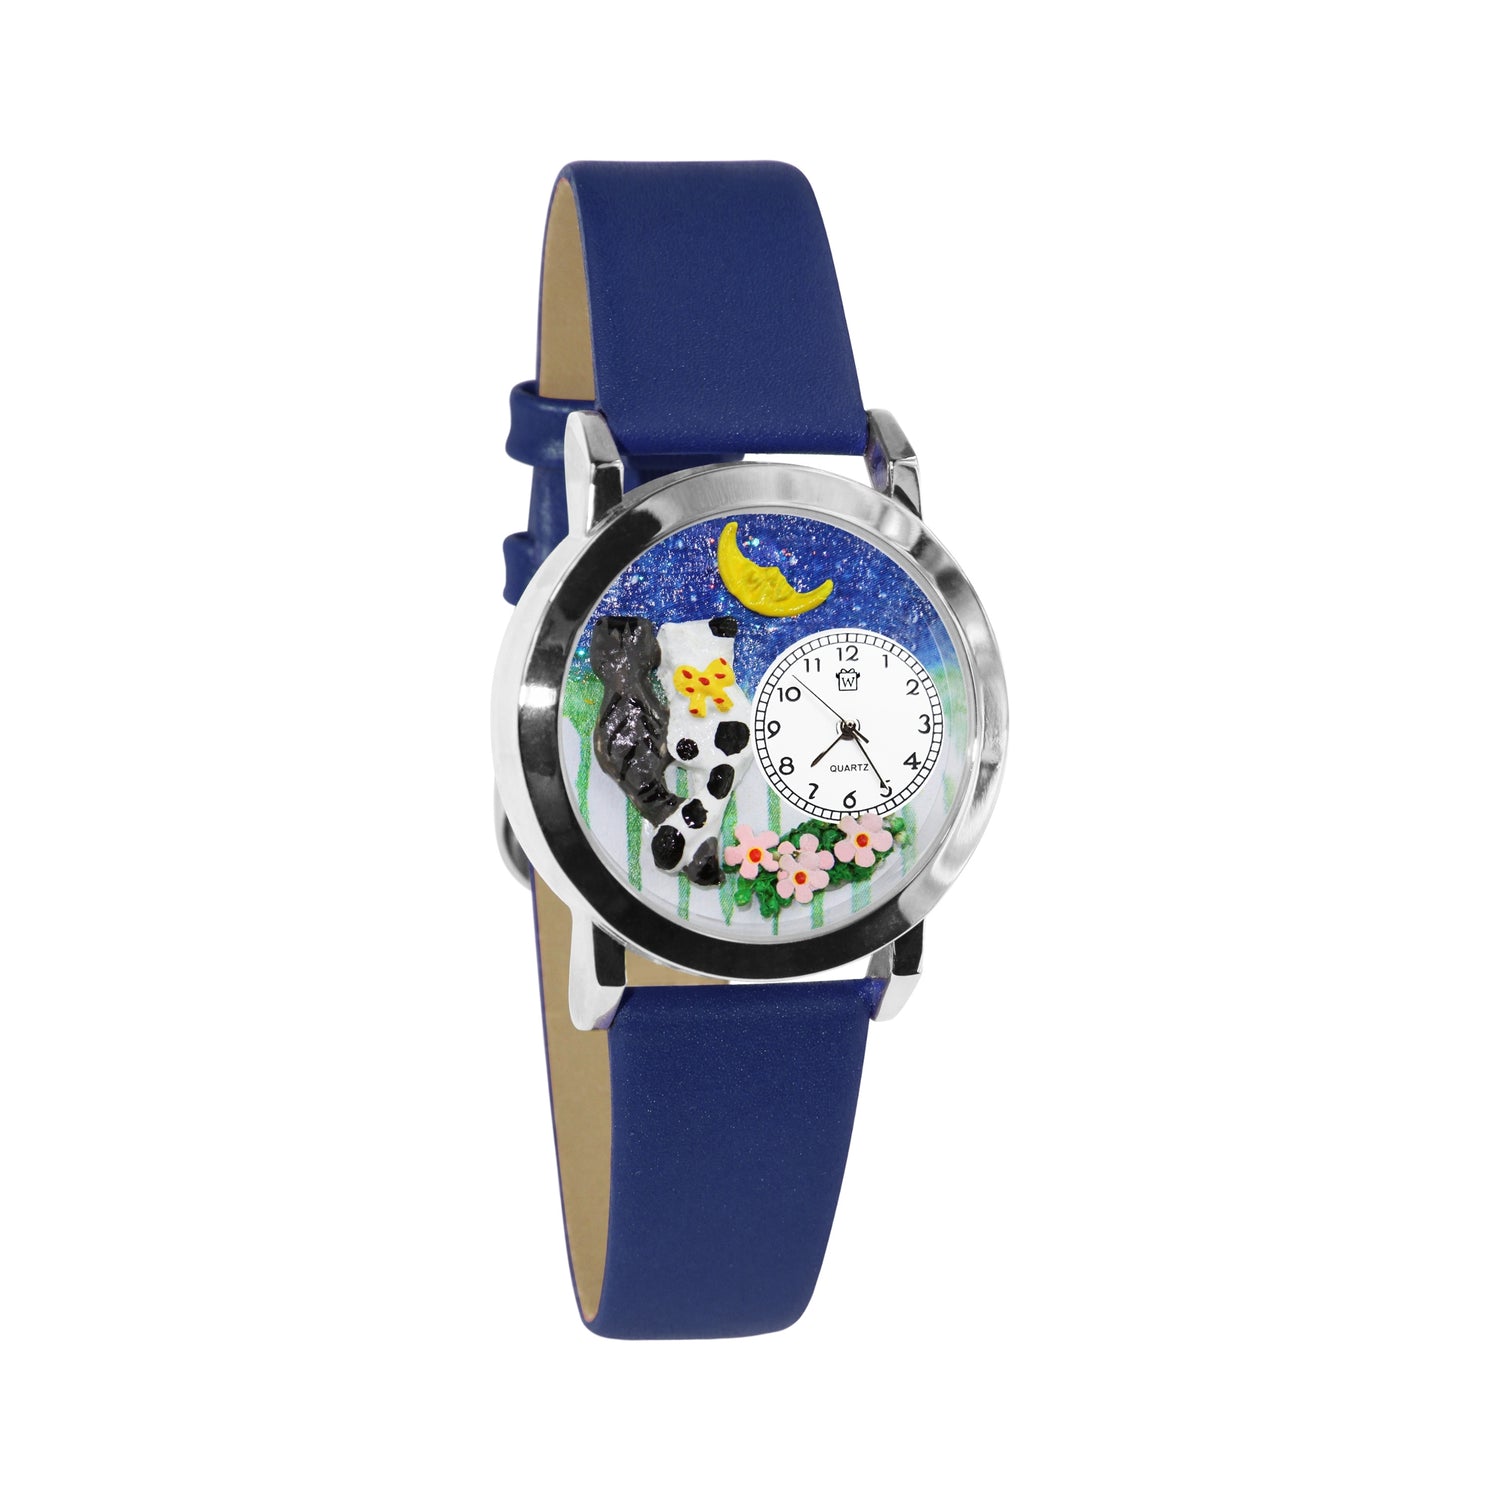 Whimsical Gifts | Cats Nights Out 3D Watch Small Style | Handmade in USA | Animal Lover | Cat Lover | Novelty Unique Fun Miniatures Gift | Silver Finish Navy Blue Leather Watch Band